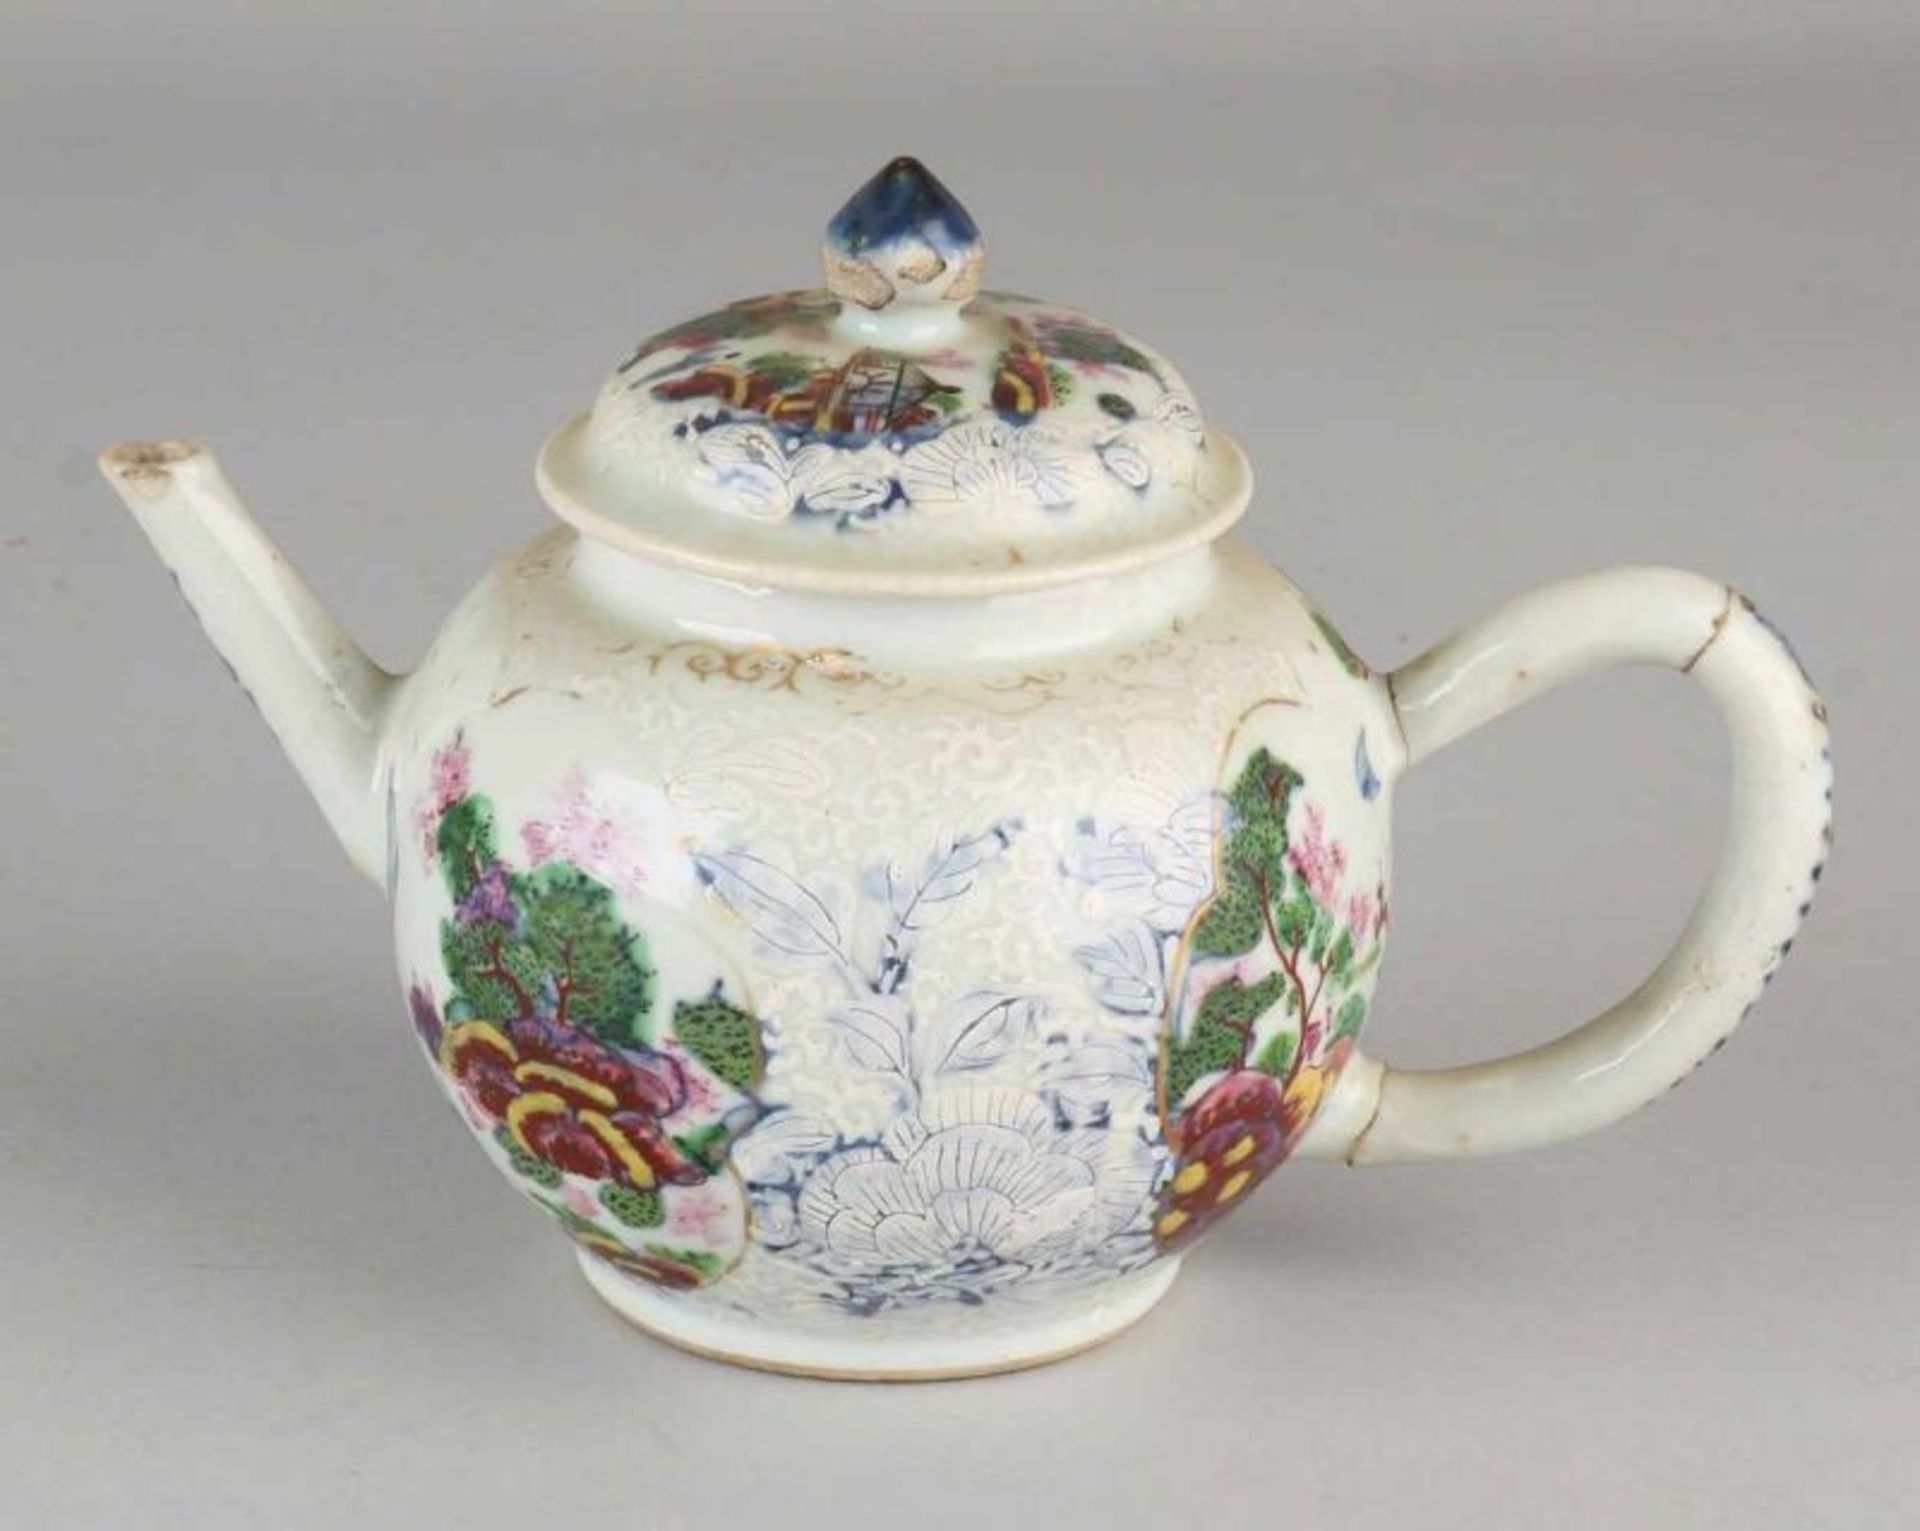 Separate 18th - 19th century Chinese porcelain teapot with landscape + white floral decors. Spout